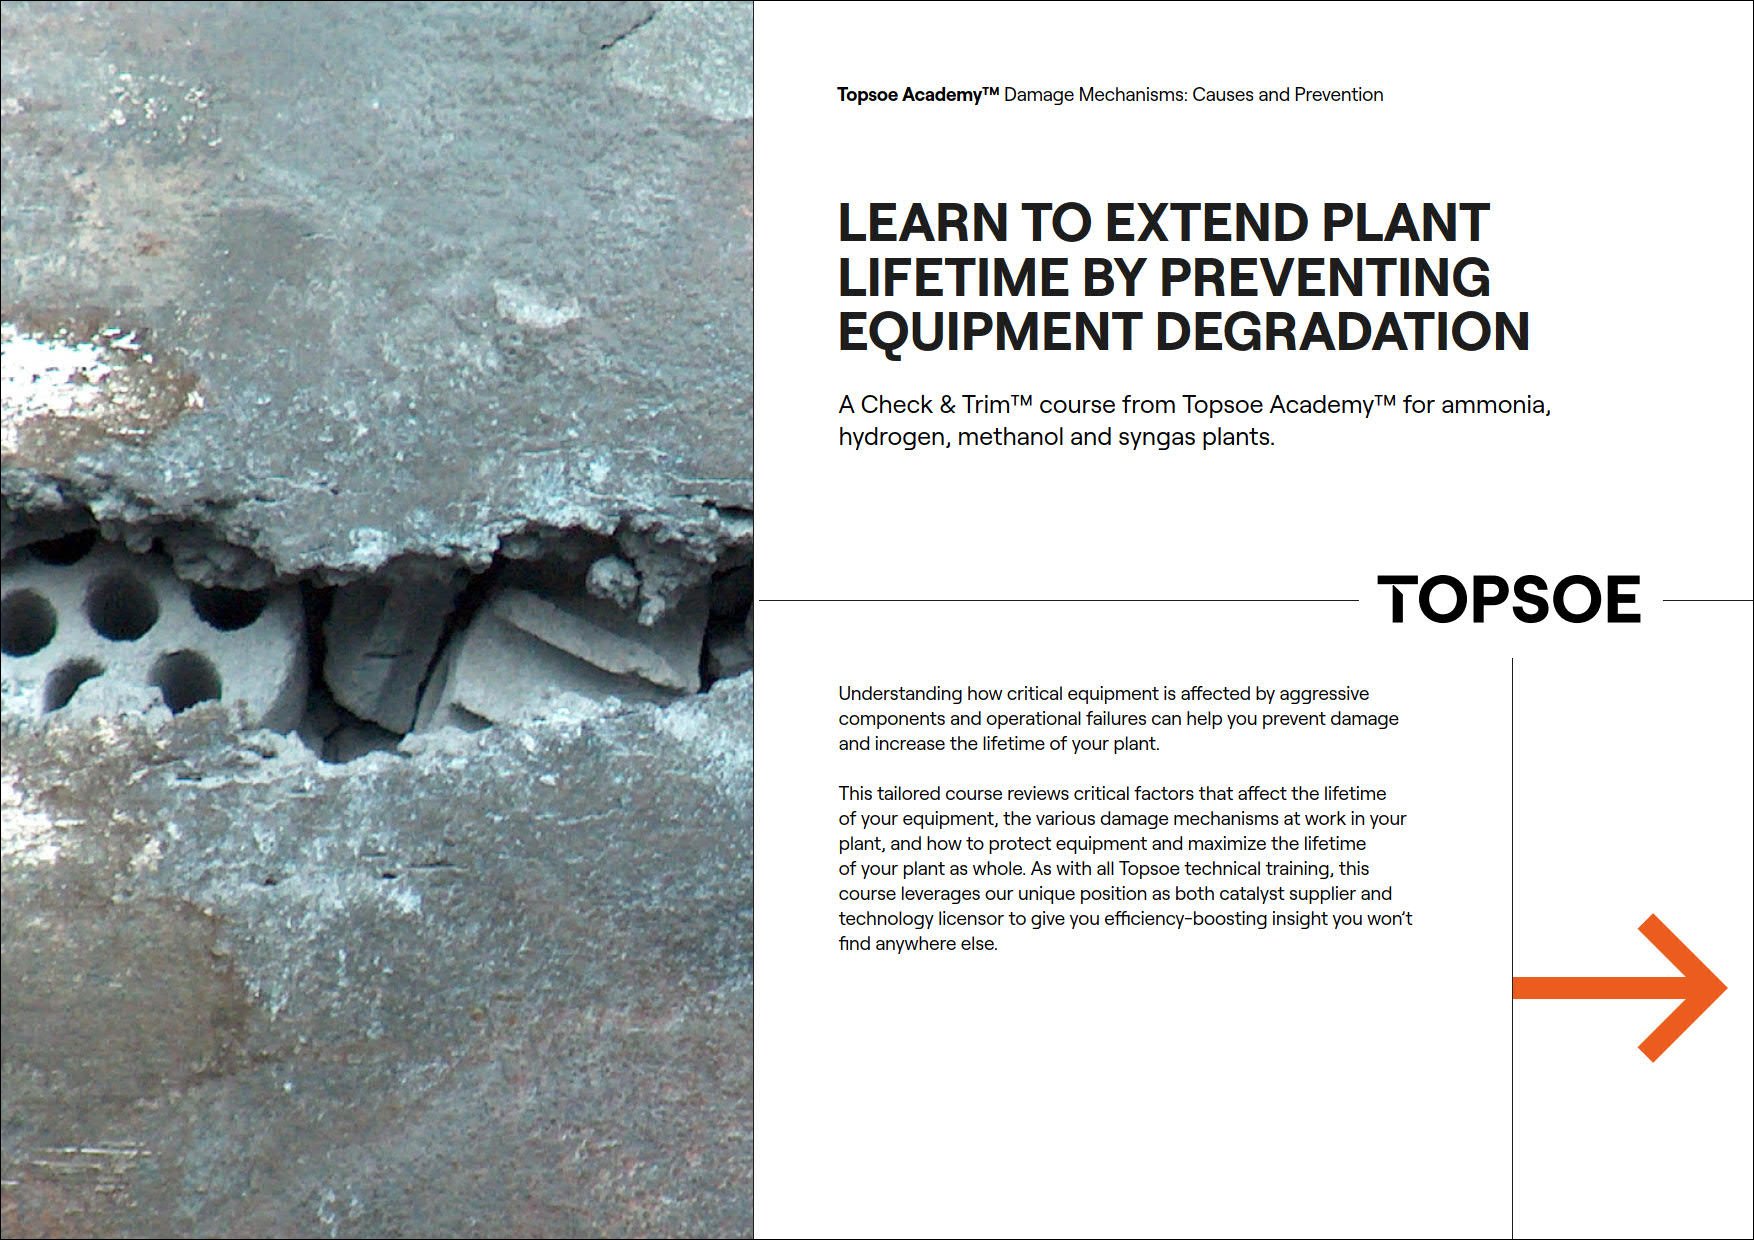 Learn to extend plant lifetime by preventing equipment degradation